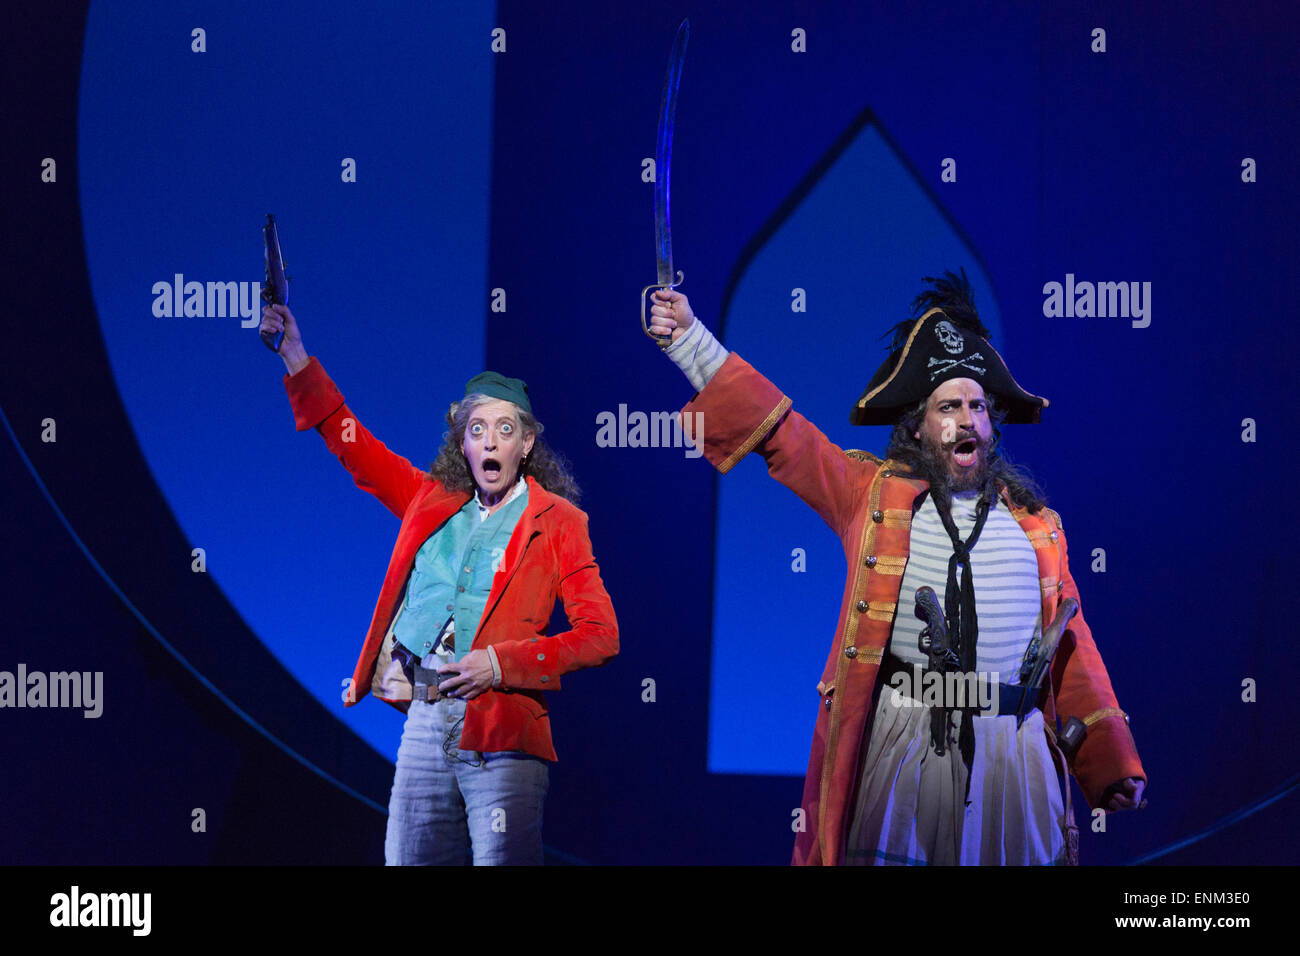 London, UK. 7 May 2015. Rebecca de Pont Davies and Joshua Bloom. Dress rehearsal of the Gilbert and Sullivan comic opera 'The Pirates of Penzance' at the London Coliseum. Award winning director Mike Leigh makes his operatic directing debut with The Pirates of Penzance. The ENO production opens at the London Coliseum on 9 May 2015 and runs for 14 productions until 27 June 2015. The English National Opera production is conducted by David Parry. Cast: Andrew Shore as Major-General Stanley, Joshua Bloom as The Pirate King, Alexander Robin Baker as Samuel, Robert Murray as Frederic, the Pirate Appr Stock Photo